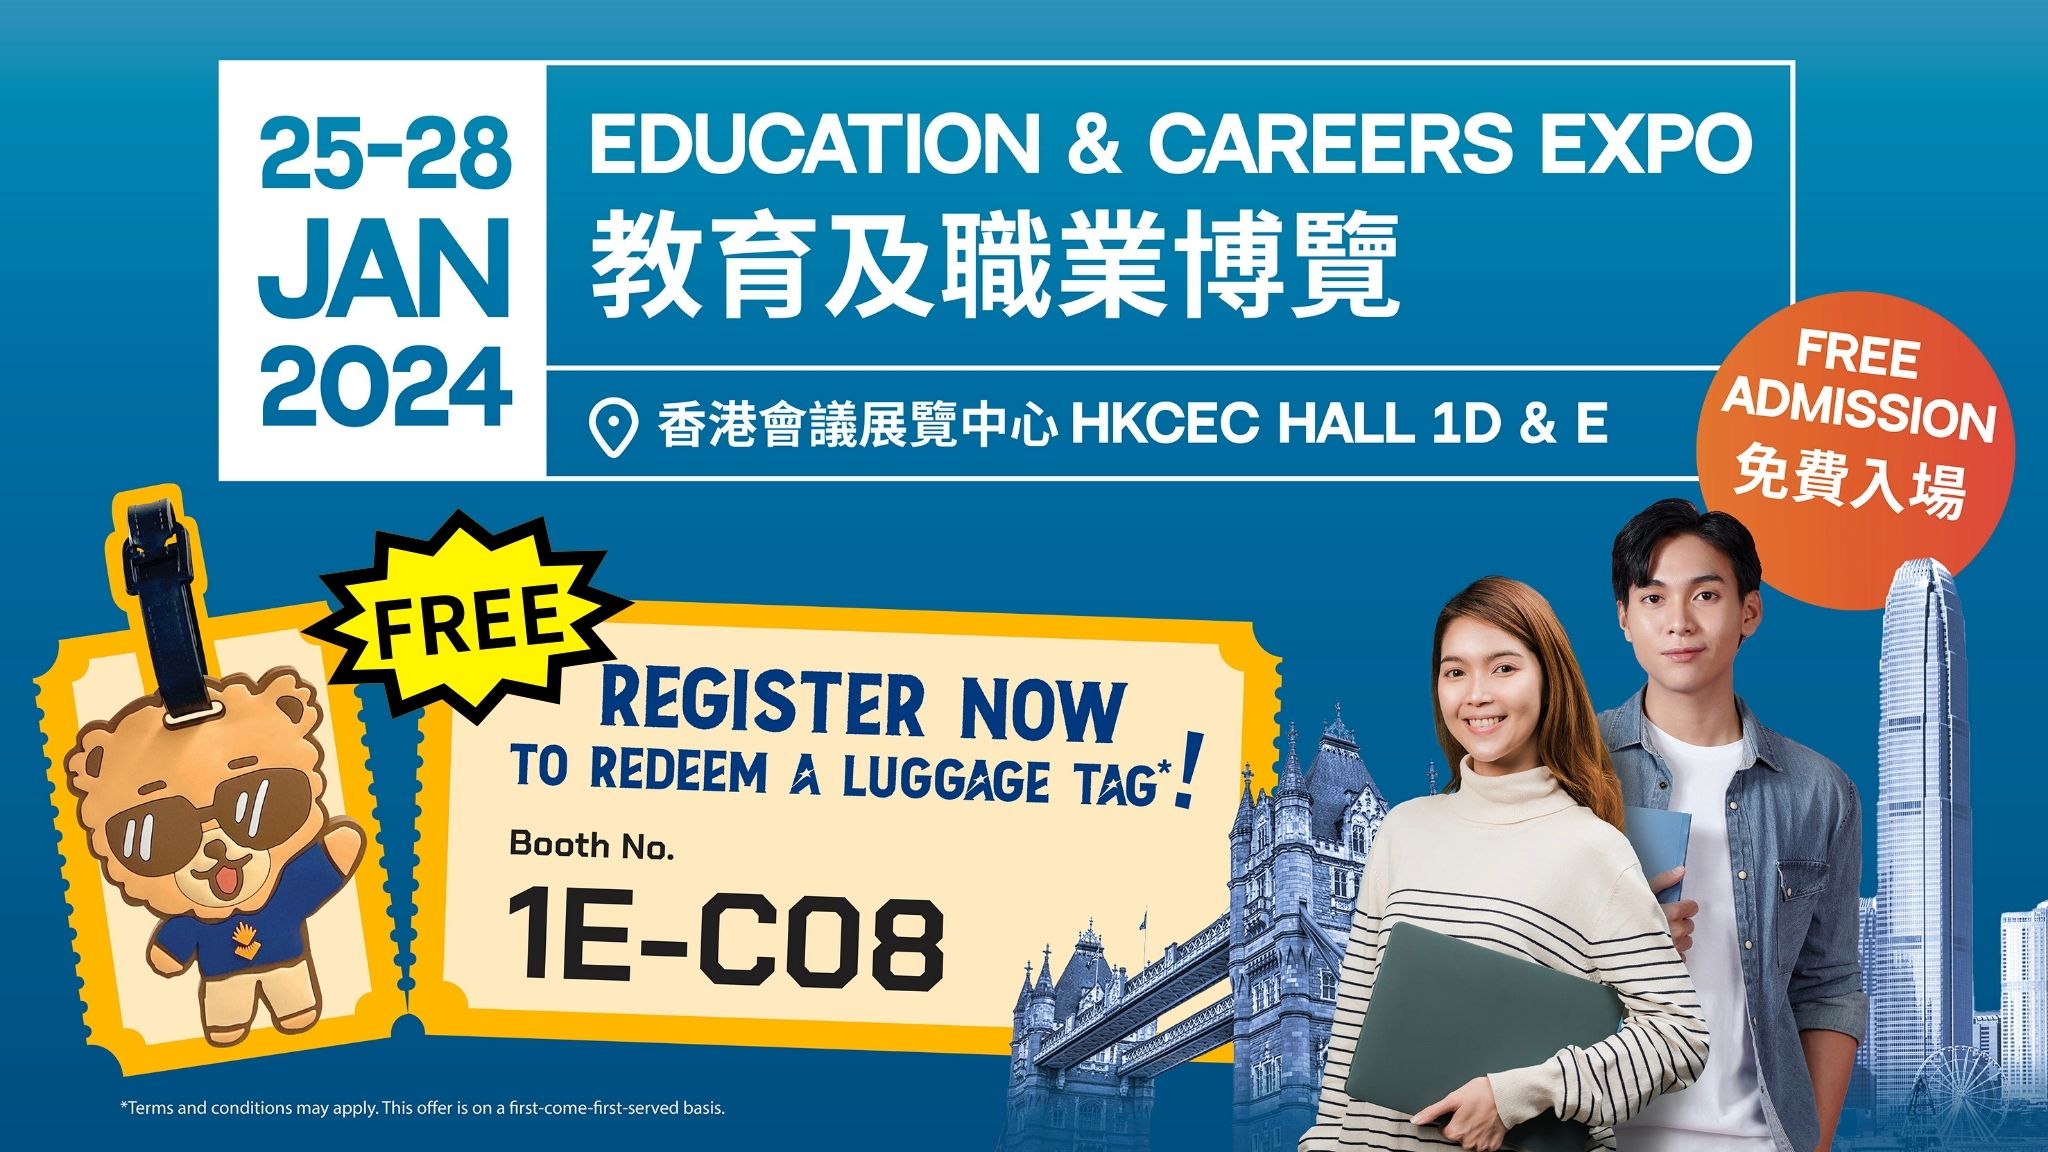 【25/1 - 28/1 Free Event】Education & Careers Expo 教育及職業博覽 | Booth no. 1E-C08